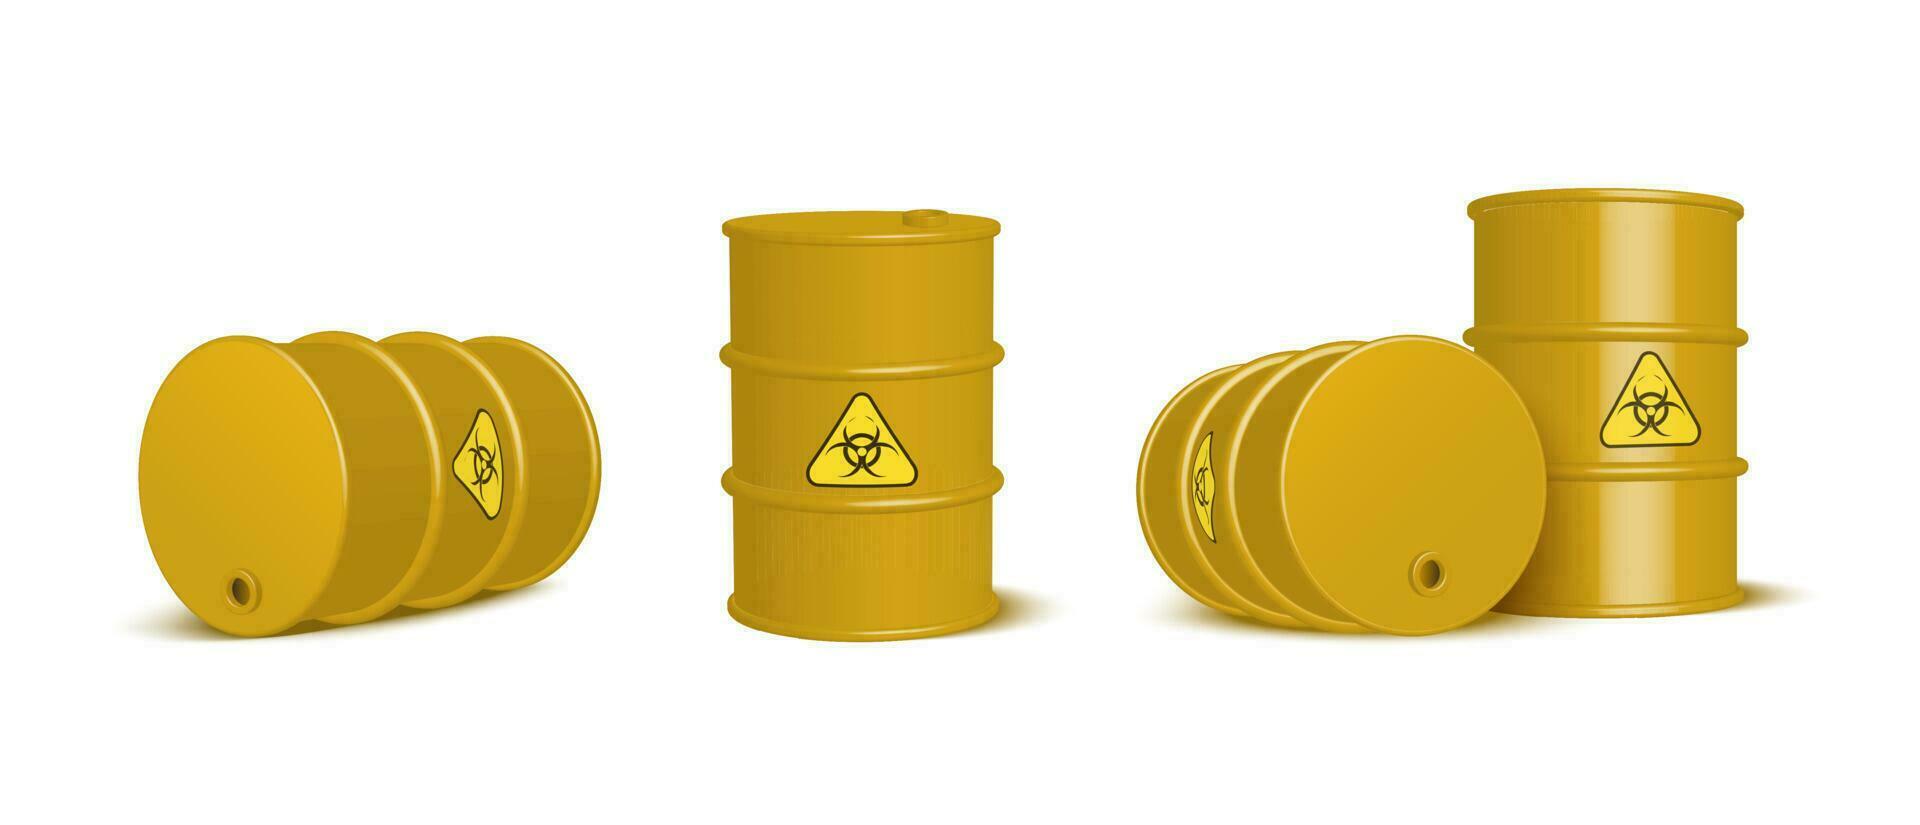 3d realistic vector icon illustration biohazard waste yellow barrels. Isolated on white background.